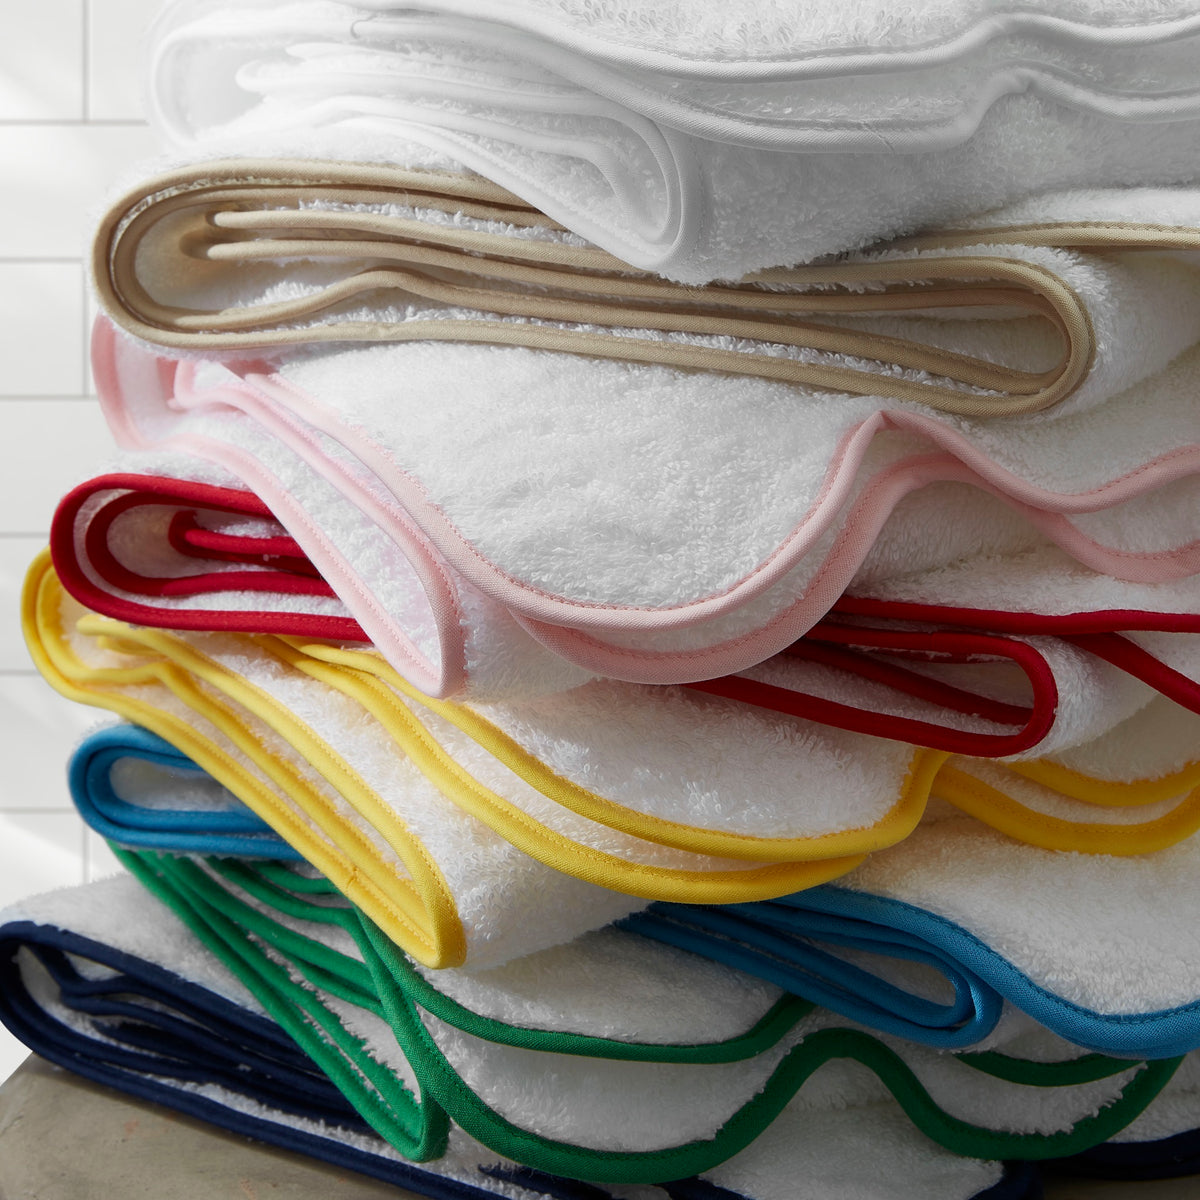 Stack of Matouk Cairo Scallop Bath Towels and Mats in Different Colors